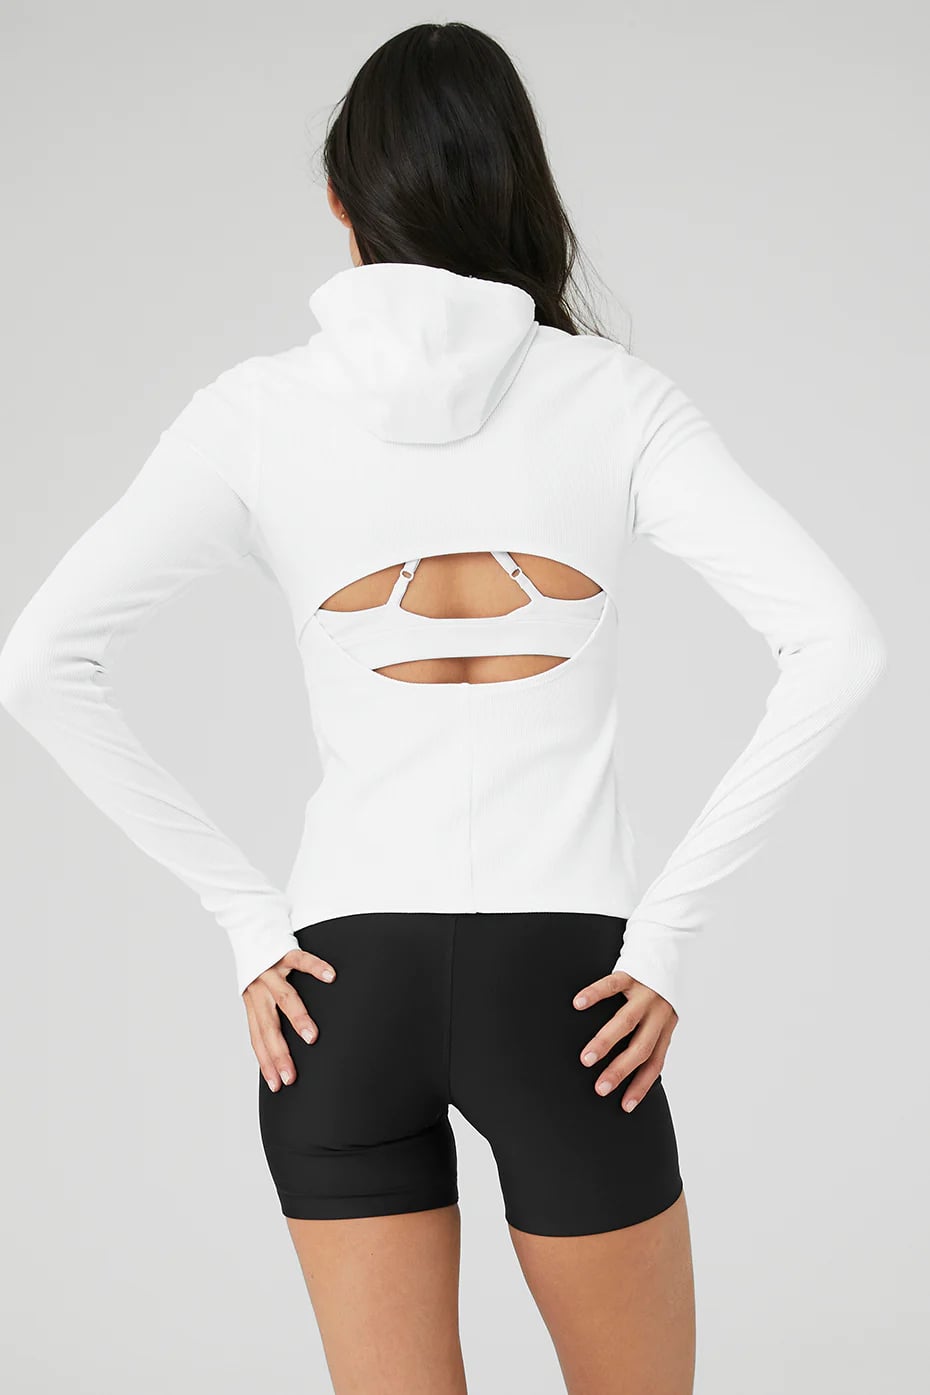 7 Athleisure Items From Alo Yoga a Fashion Editor Recommends